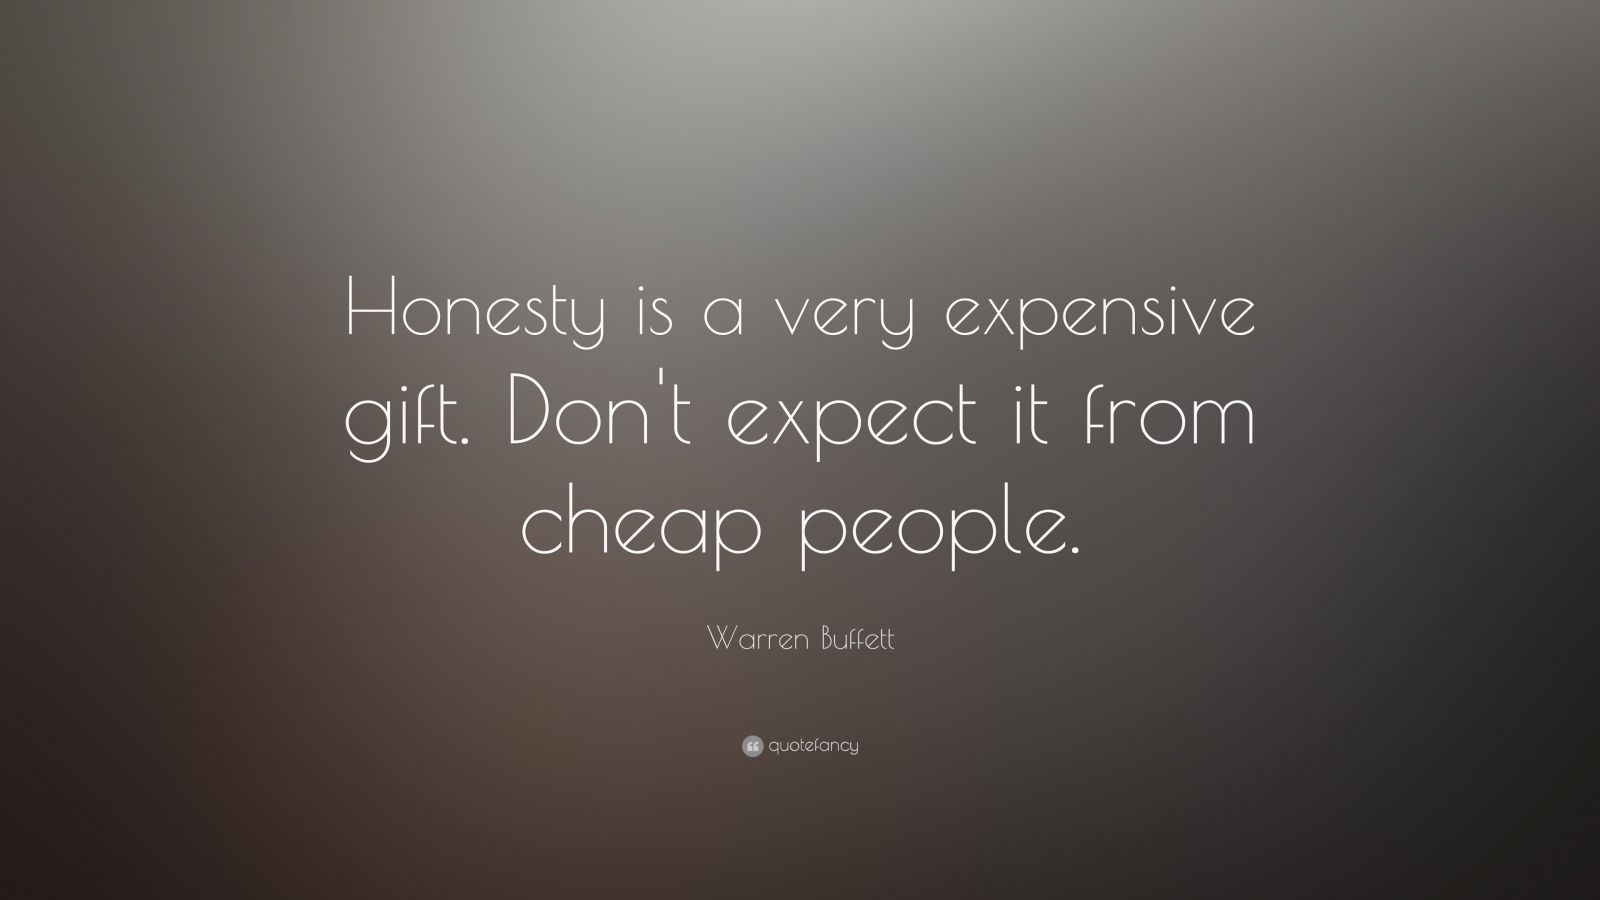 Warren Buffett Quote: “Honesty is a very expensive gift. Don't expect it from cheap people.” (19 wallpaper)